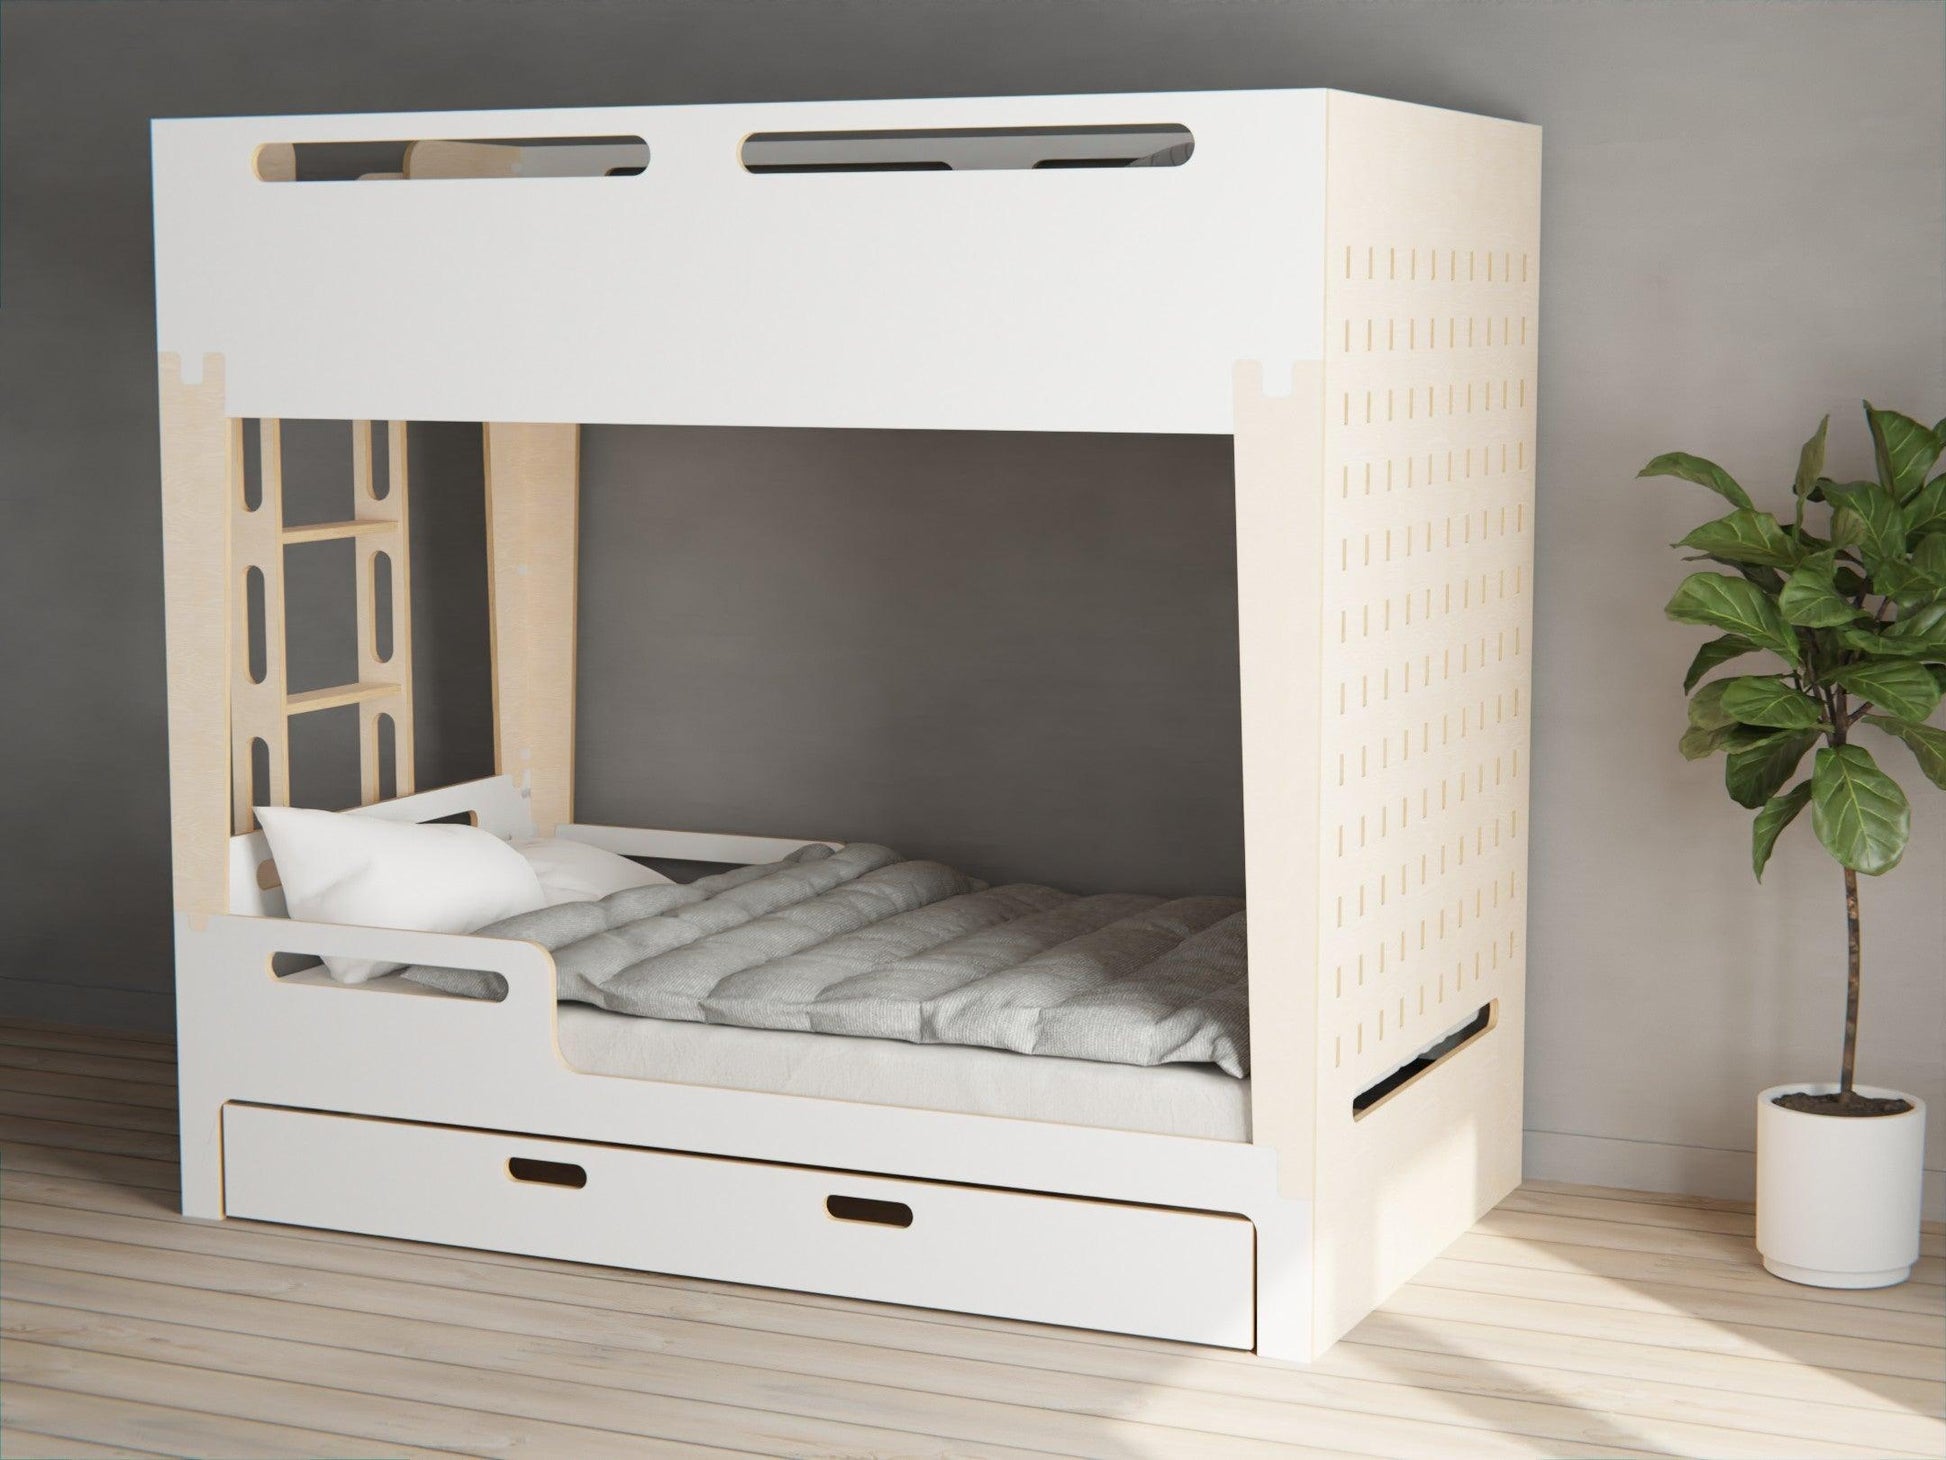 Modern, chic, and functional! Scandinavian-style plywood bunk beds with storage drawer. Available in white.